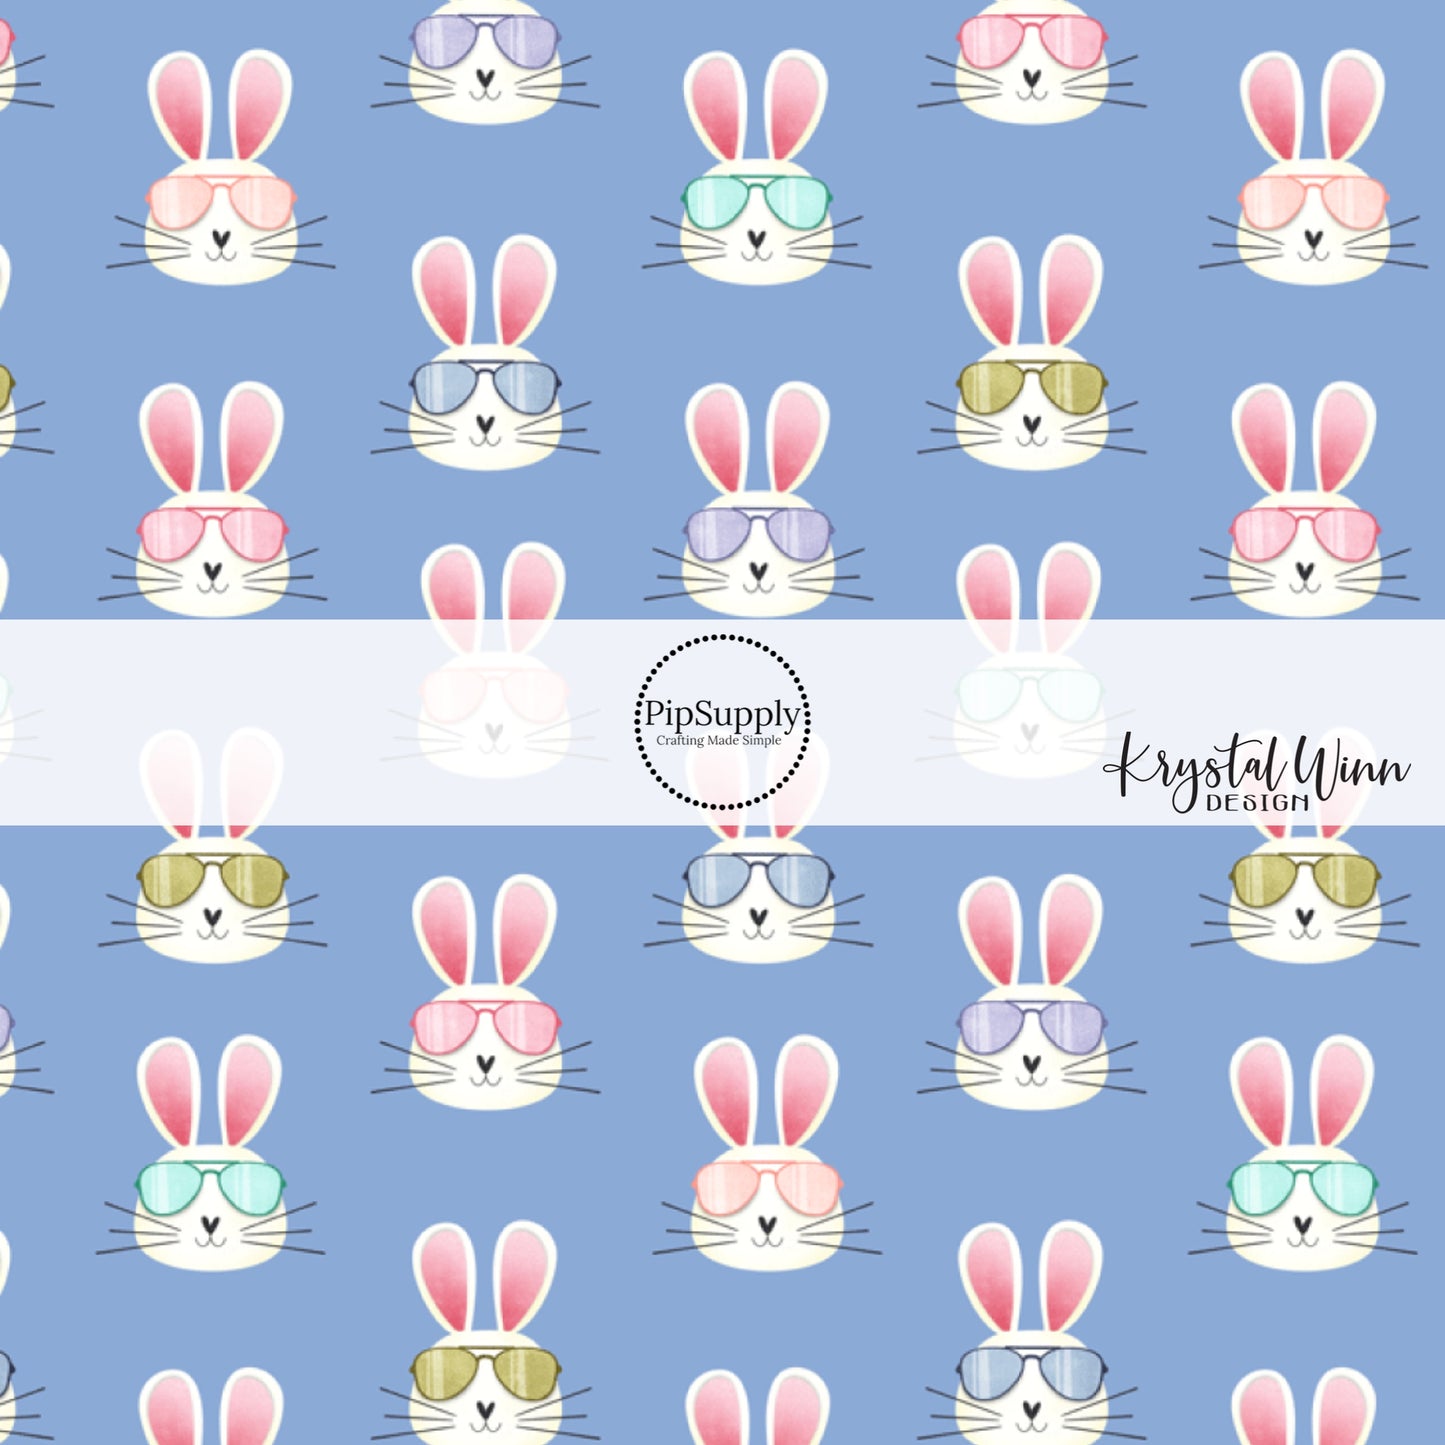 green, pink, purple, blue, and aqua sunglasses on white bunnies bow strips